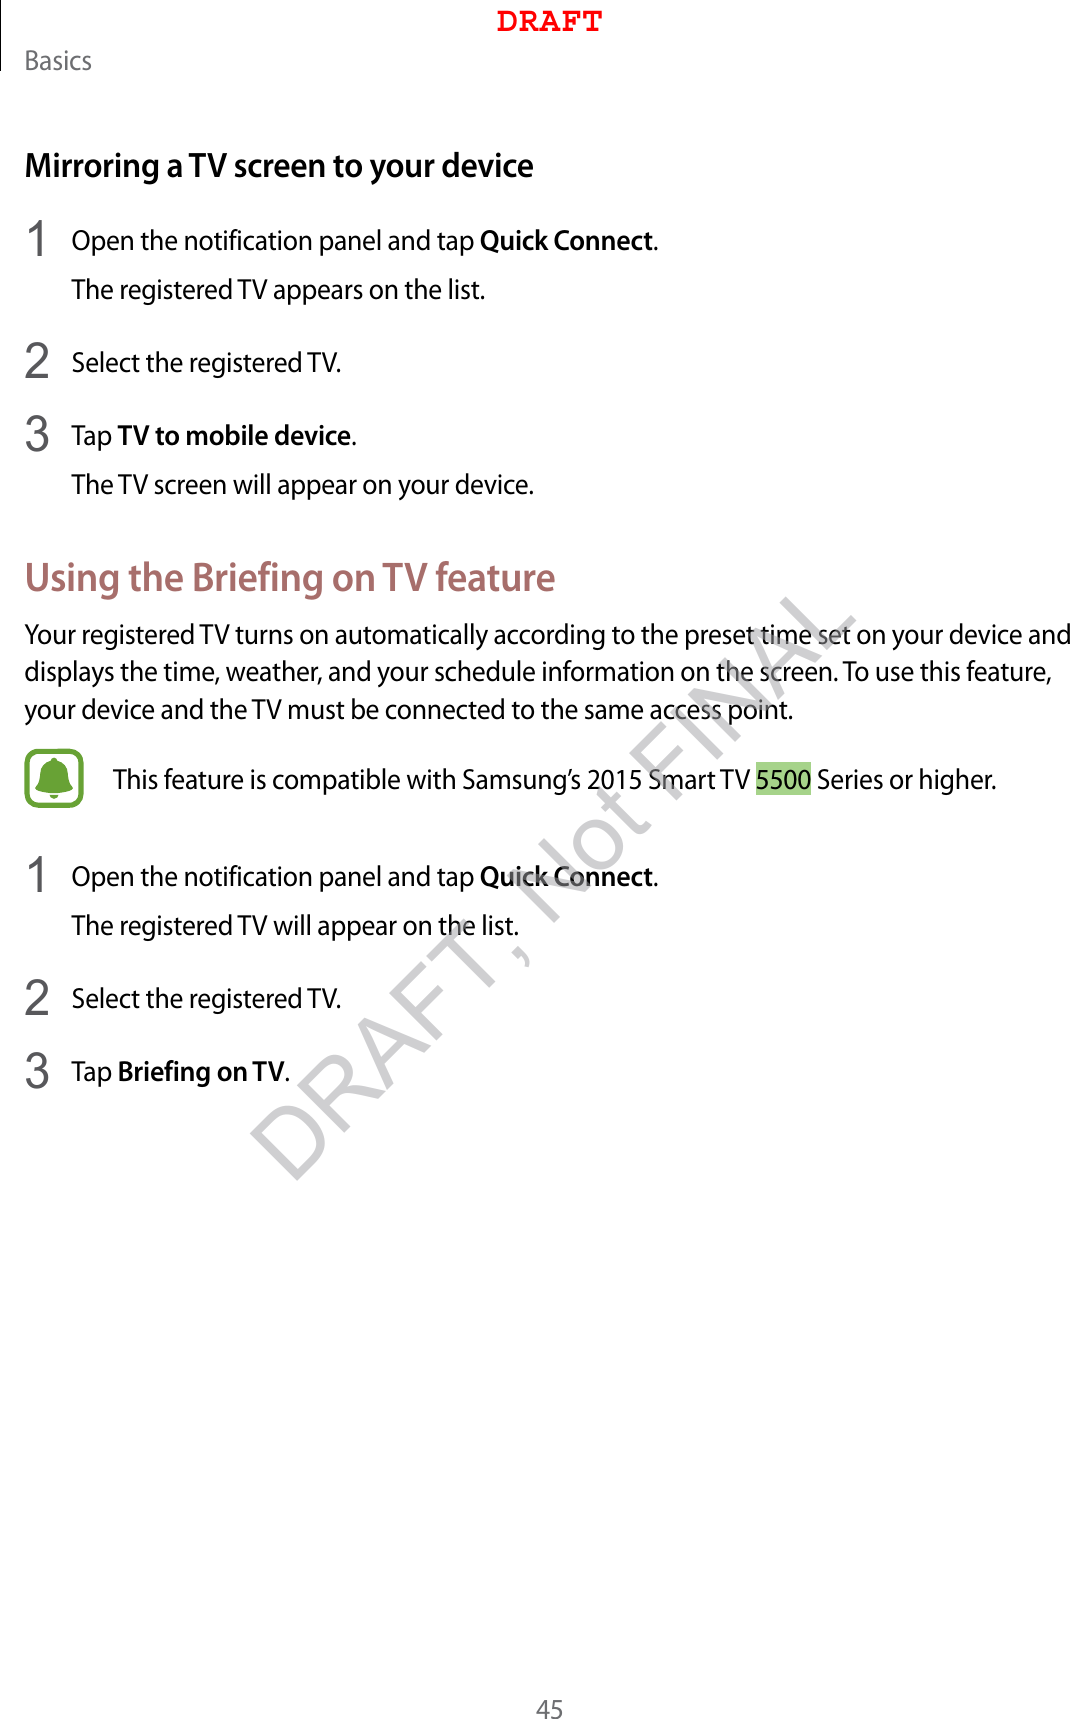 Basics45Mirroring a TV screen to your device1  Open the notification panel and tap Quick Connect.The registered TV appears on the list.2  Select the registered TV.3  Tap TV to mobile device.The TV screen will appear on your device.Using the Briefing on TV featureYour registered TV turns on automatically according to the preset time set on your device and displays the time, weather, and your schedule information on the screen. To use this feature, your device and the TV must be connected to the same access point.This feature is compatible with Samsung’s 2015 Smart TV 5500 Series or higher.1  Open the notification panel and tap Quick Connect.The registered TV will appear on the list.2  Select the registered TV.3  Tap Briefing on TV.DRAFTDRAFT, Not FINAL